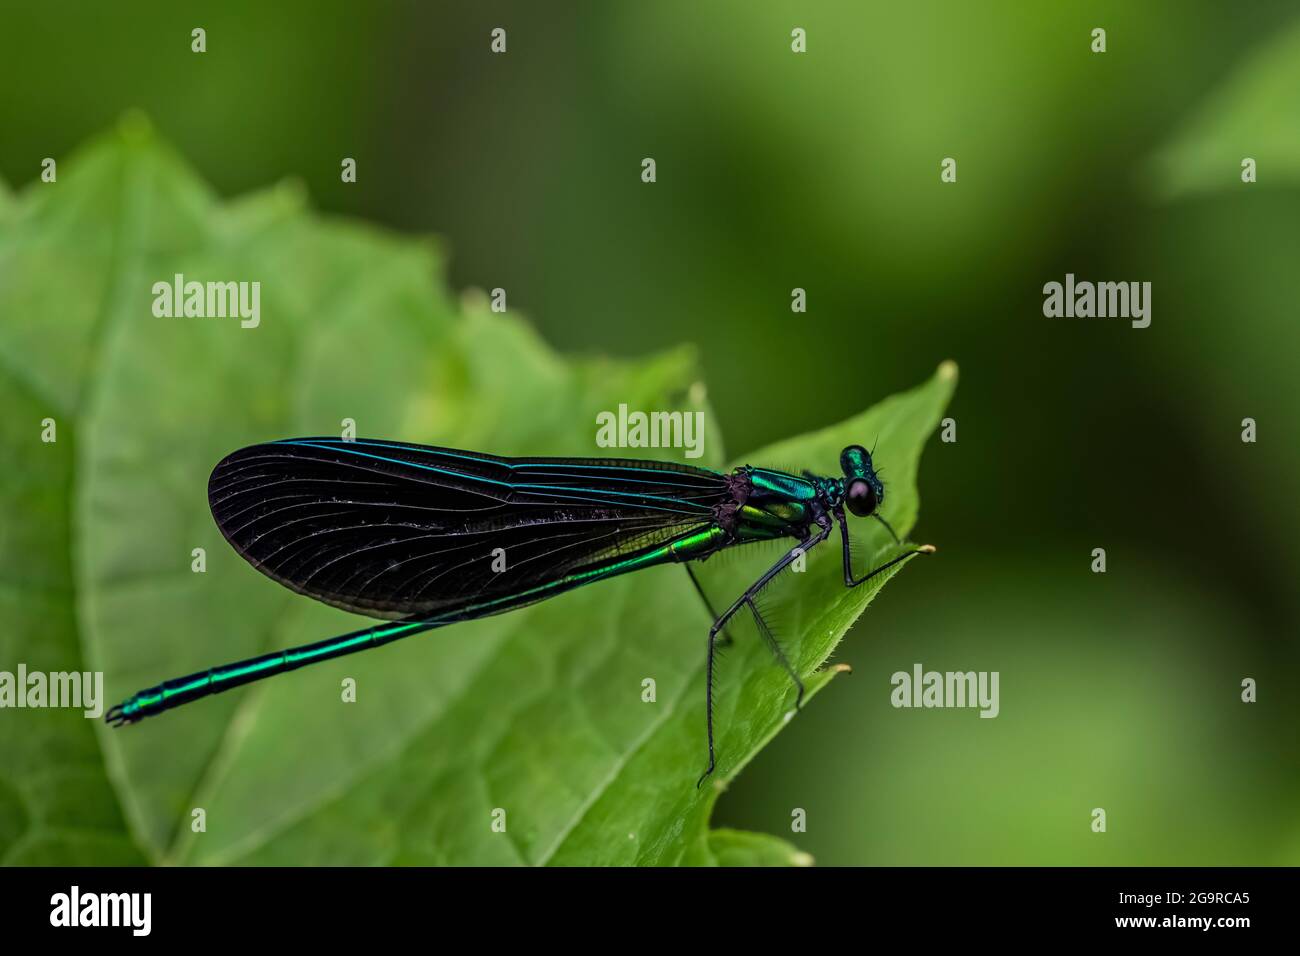 Black-wnged Damselfly, Calopteryx maculata, resting on a leaf in the sun In Grand River Community Park near Lansing, Michigan, USA Stock Photo